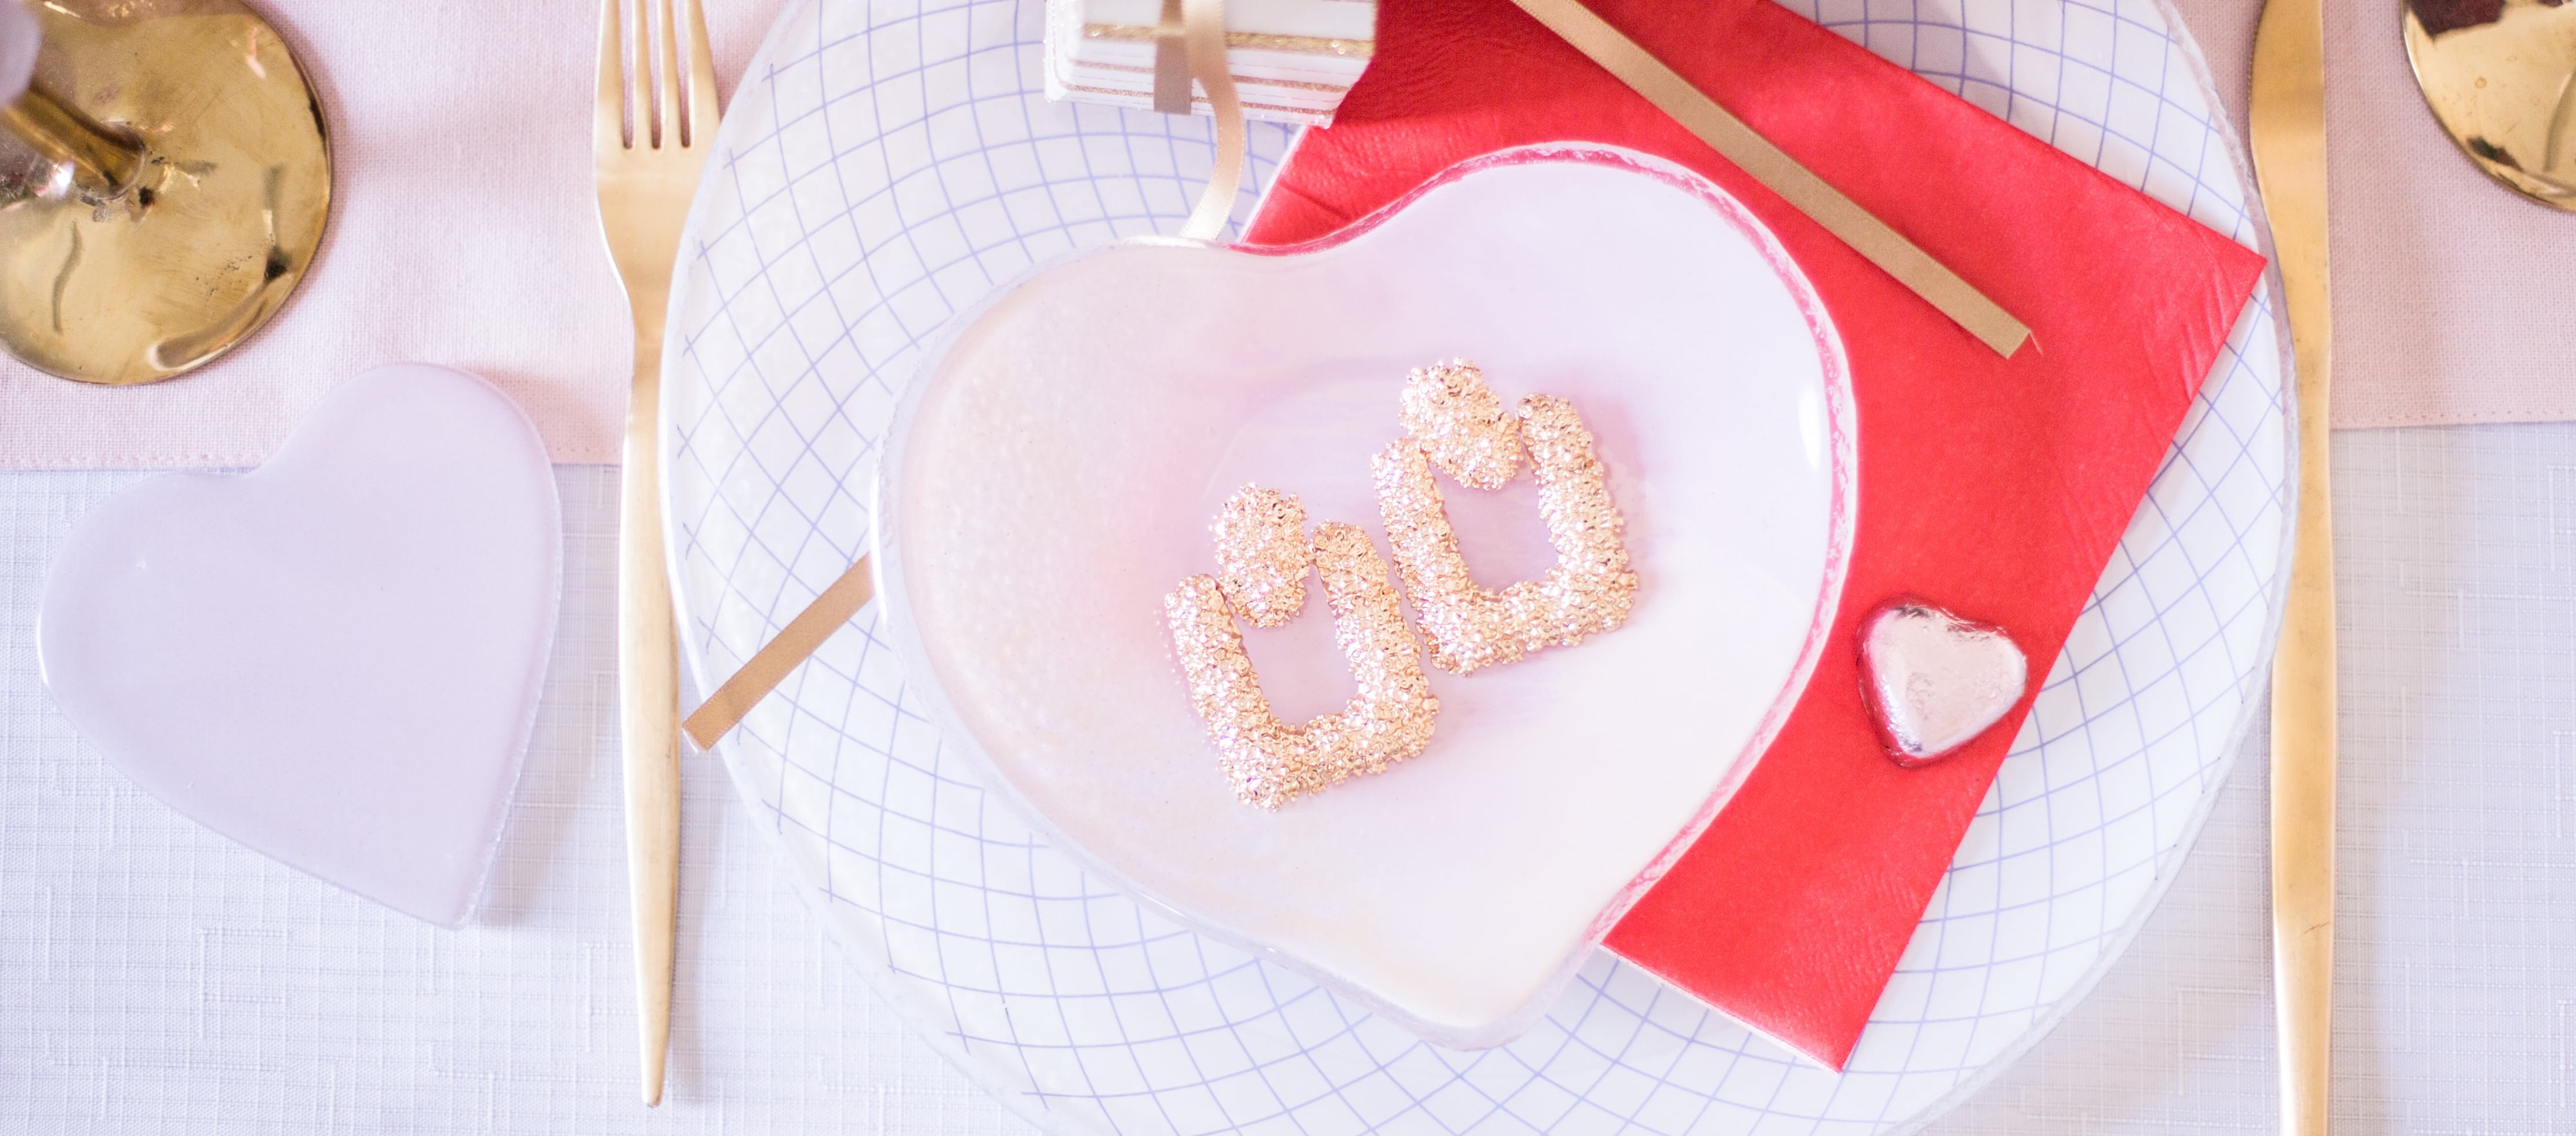 Galentine's Day Table Setting - All pink table setting with heart-shaped plates lots of champagne! Get ideas for your Galentine's Day party from our blog!